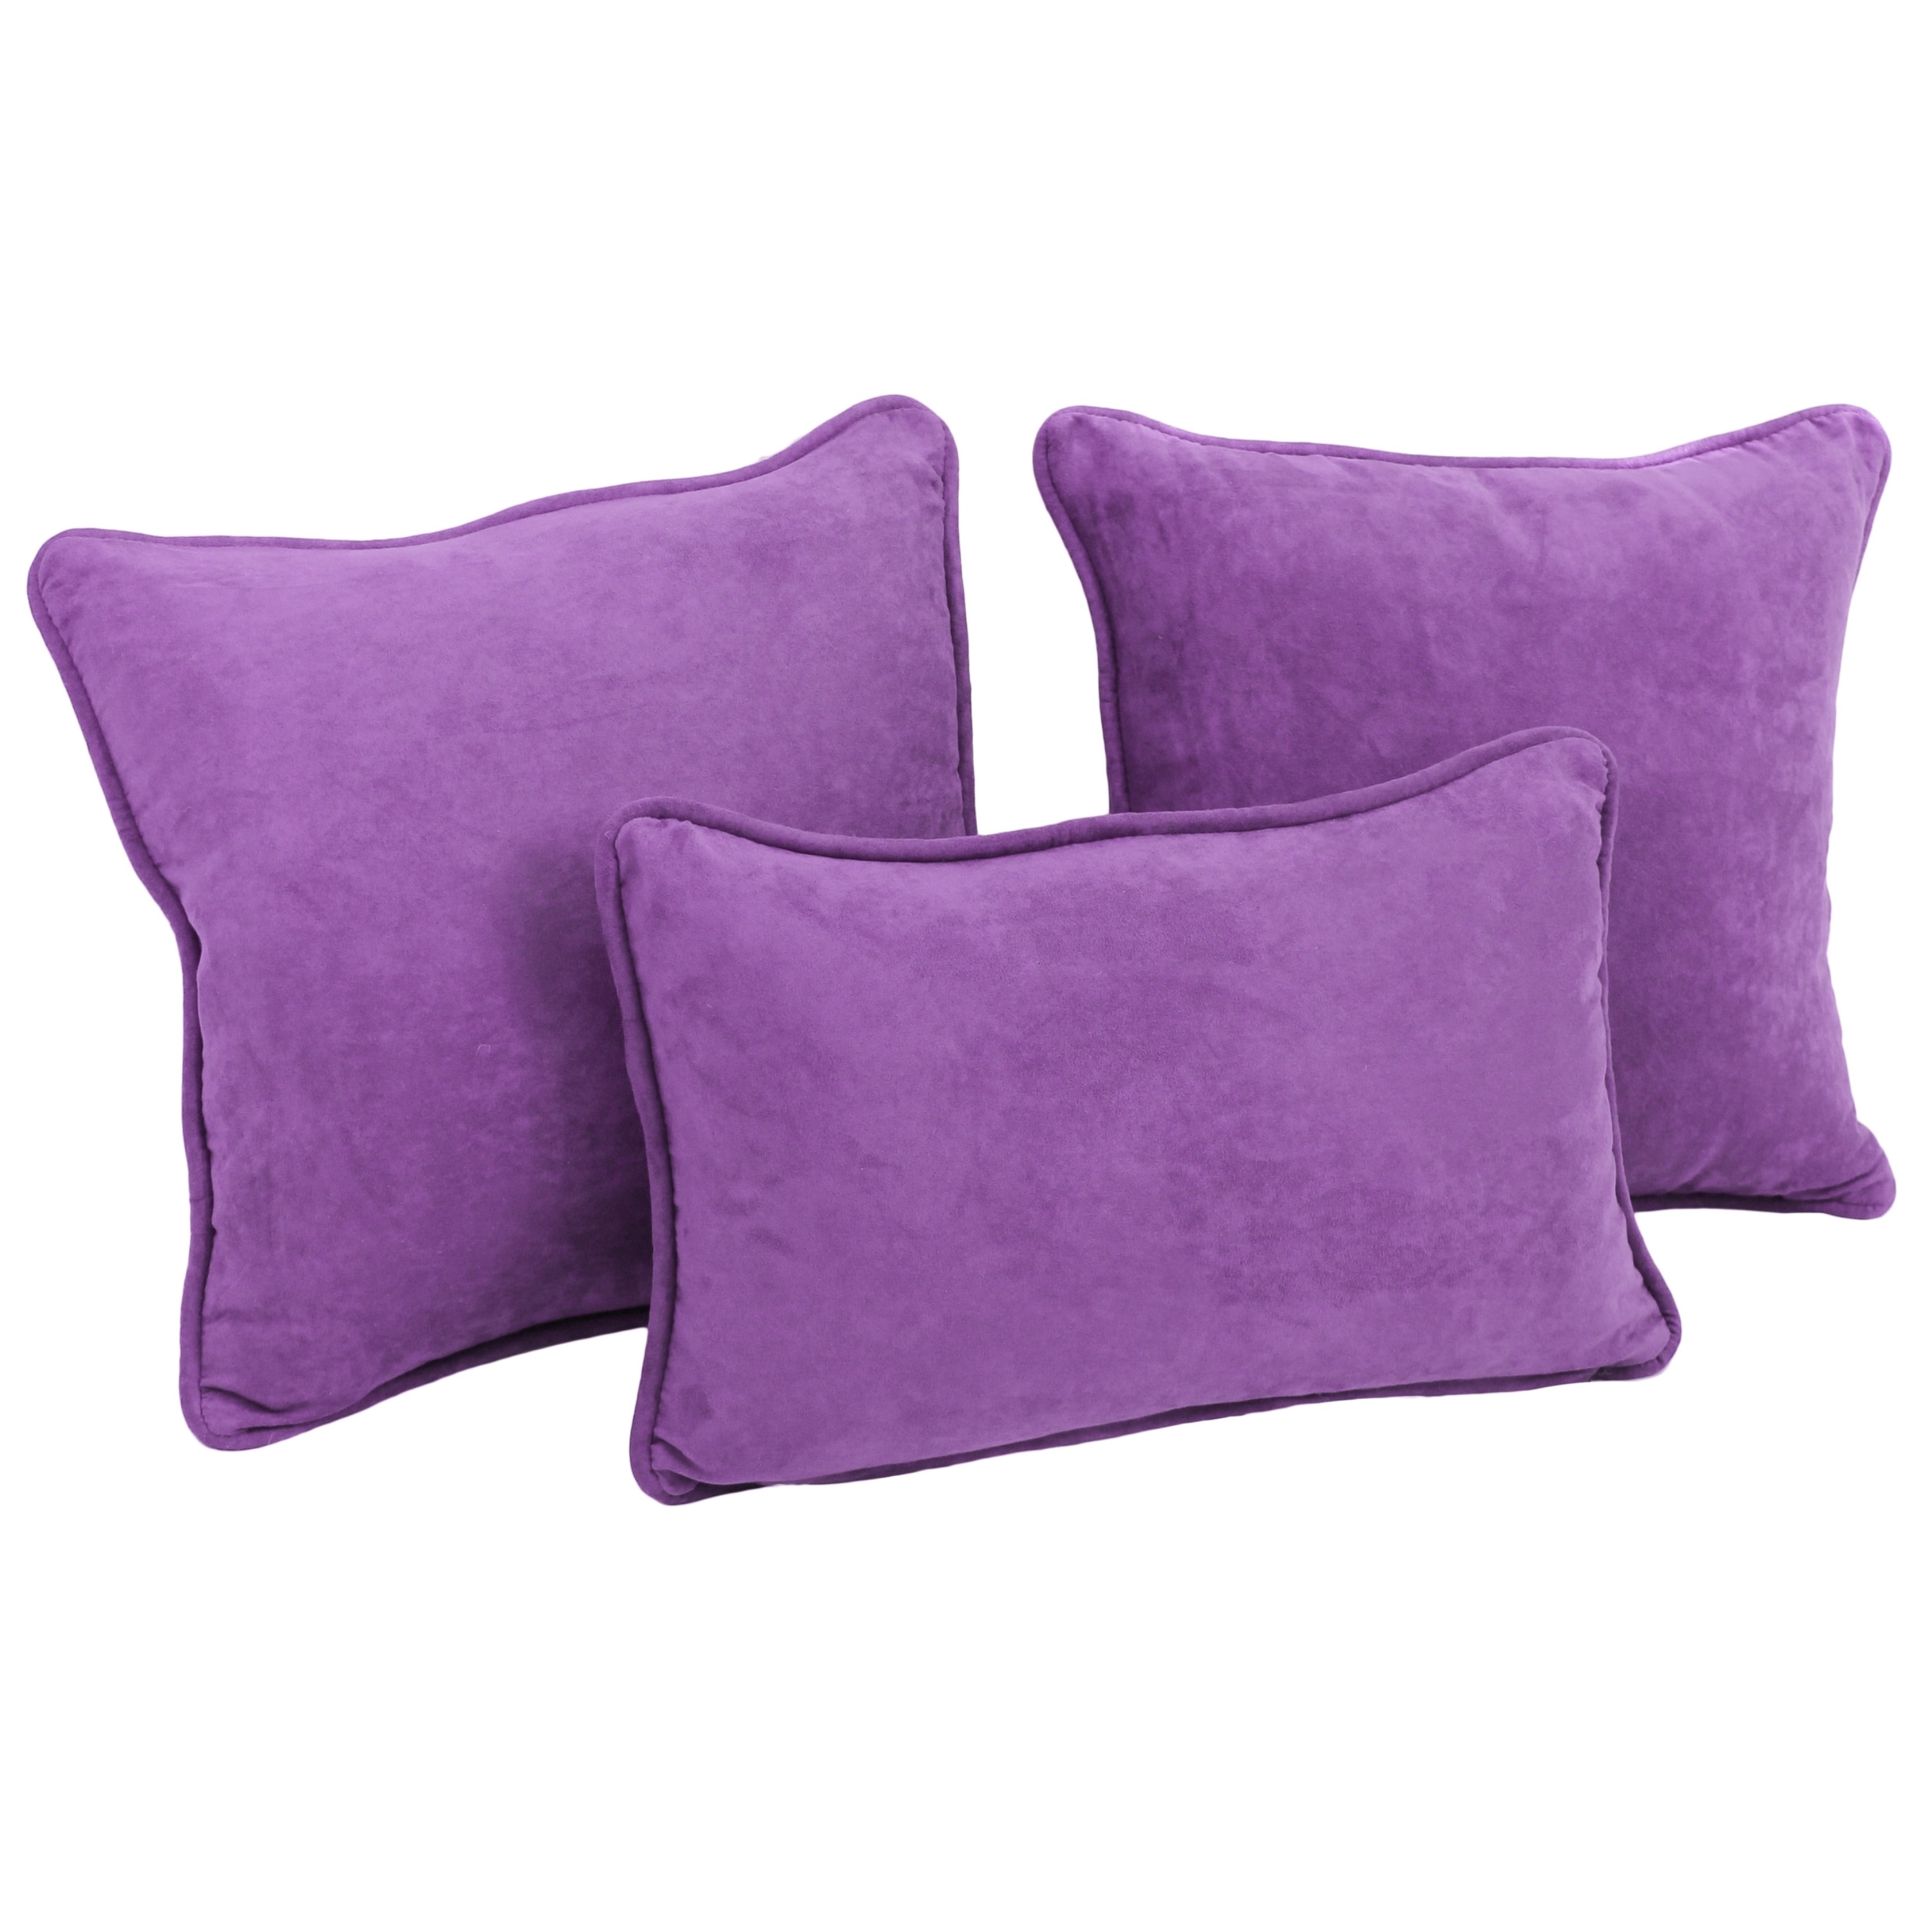 https://ak1.ostkcdn.com/images/products/is/images/direct/f23fa3ad3e69054962b9520bd82c01355b5e53ee/Blazing-Needles-Delaney-3-piece-Indoor-Throw-Pillow-Set.jpg